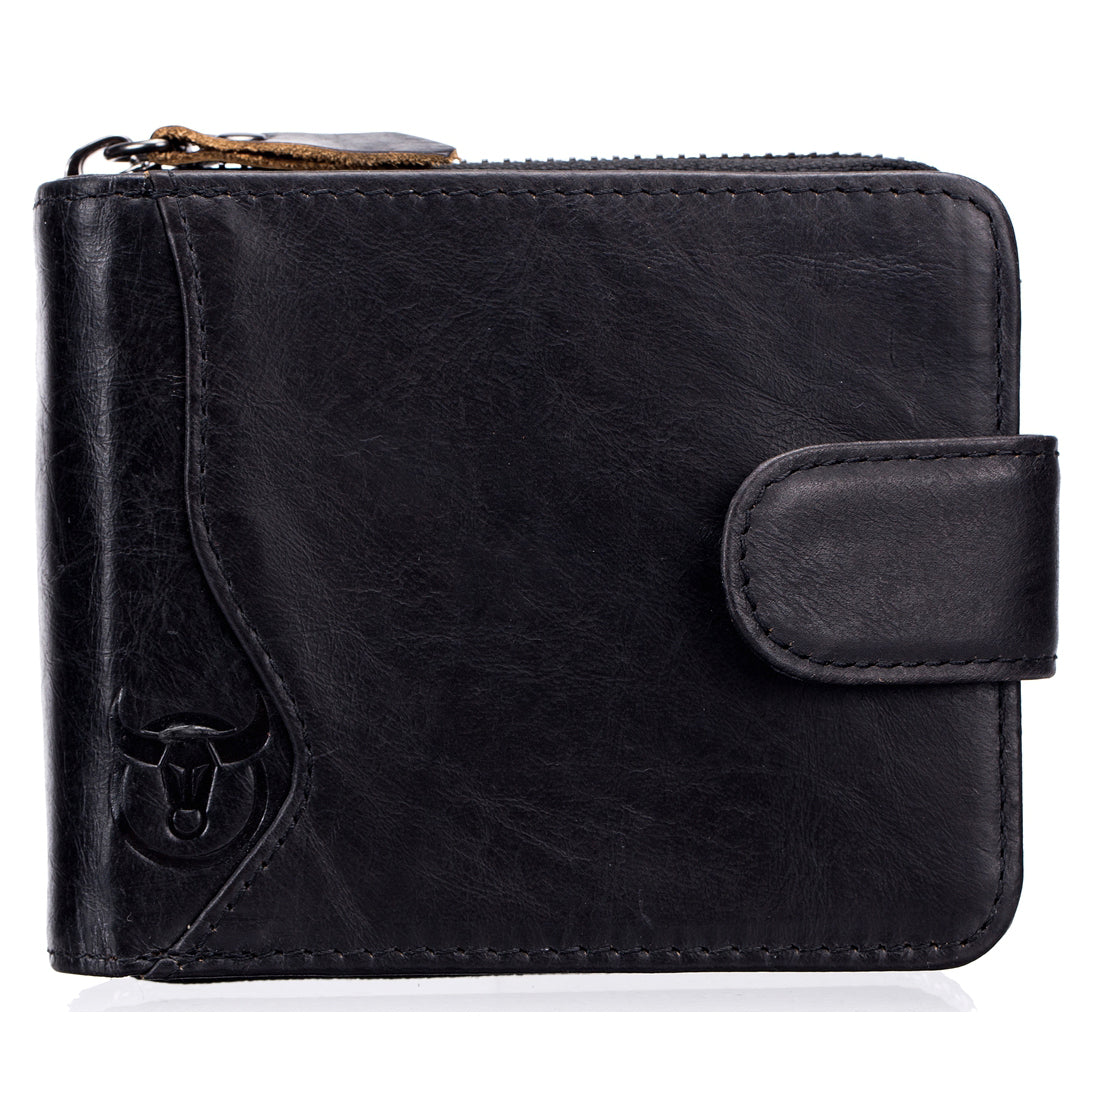 Men's Zip Leather Wallet 14 Credit Card Holder with 4 ID Windows